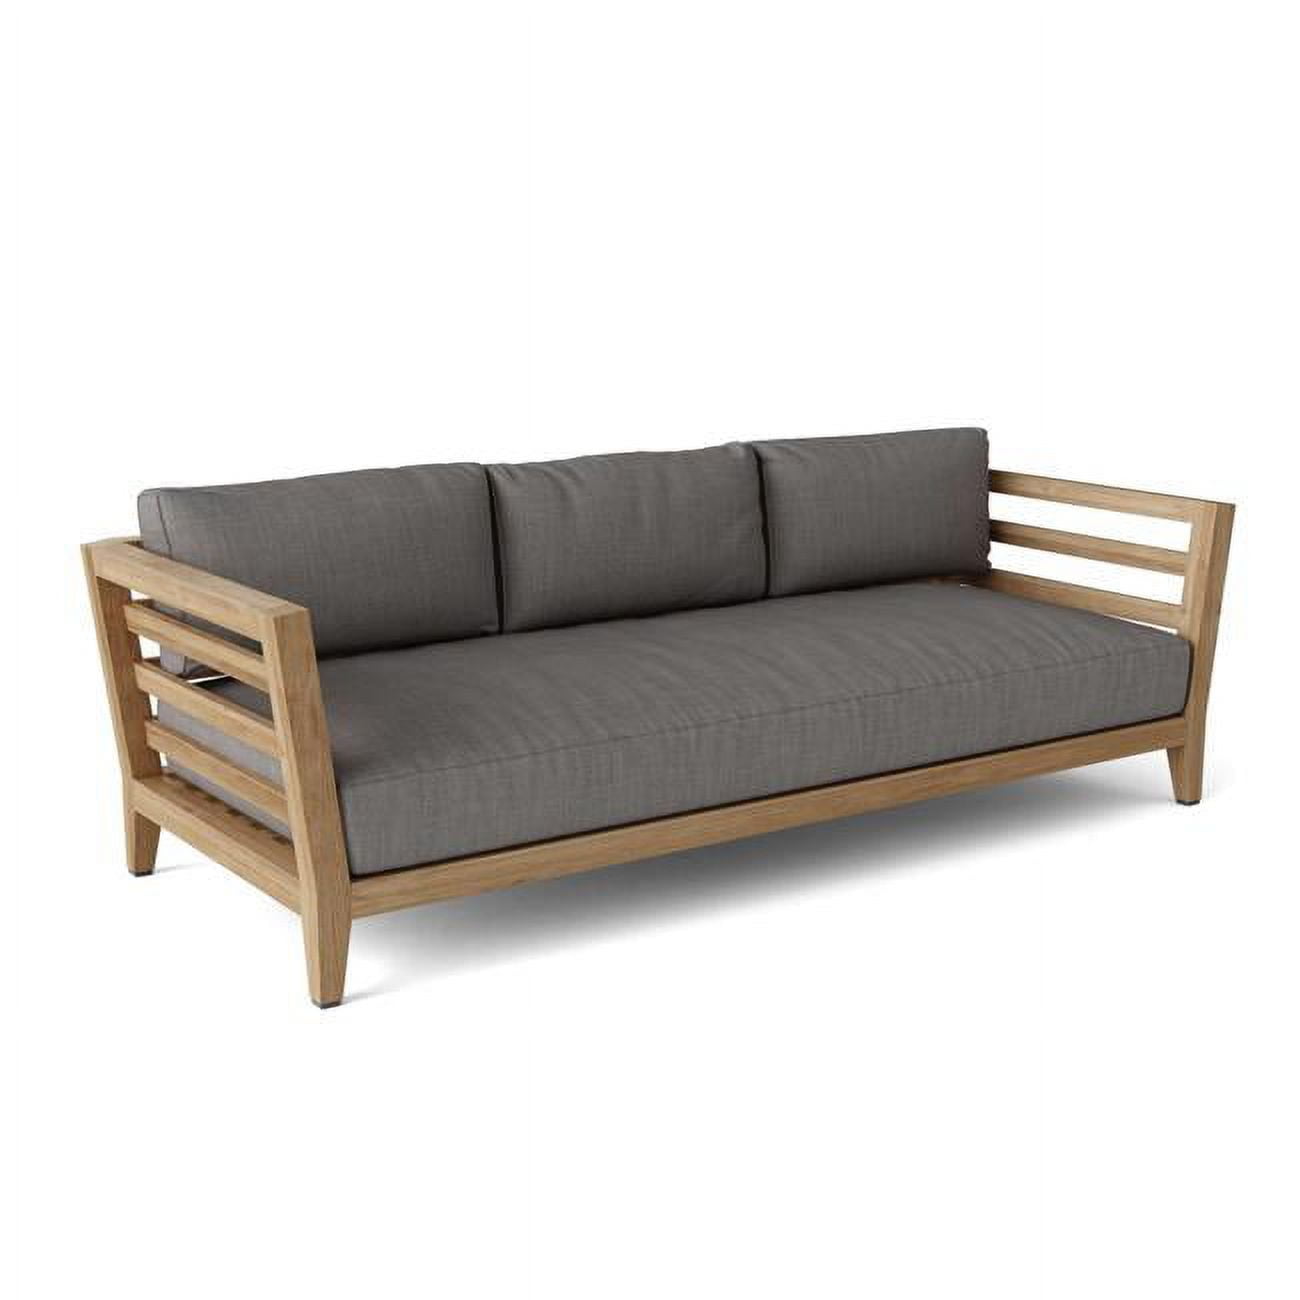 Ds-833 Cordoba 3-seater Bench